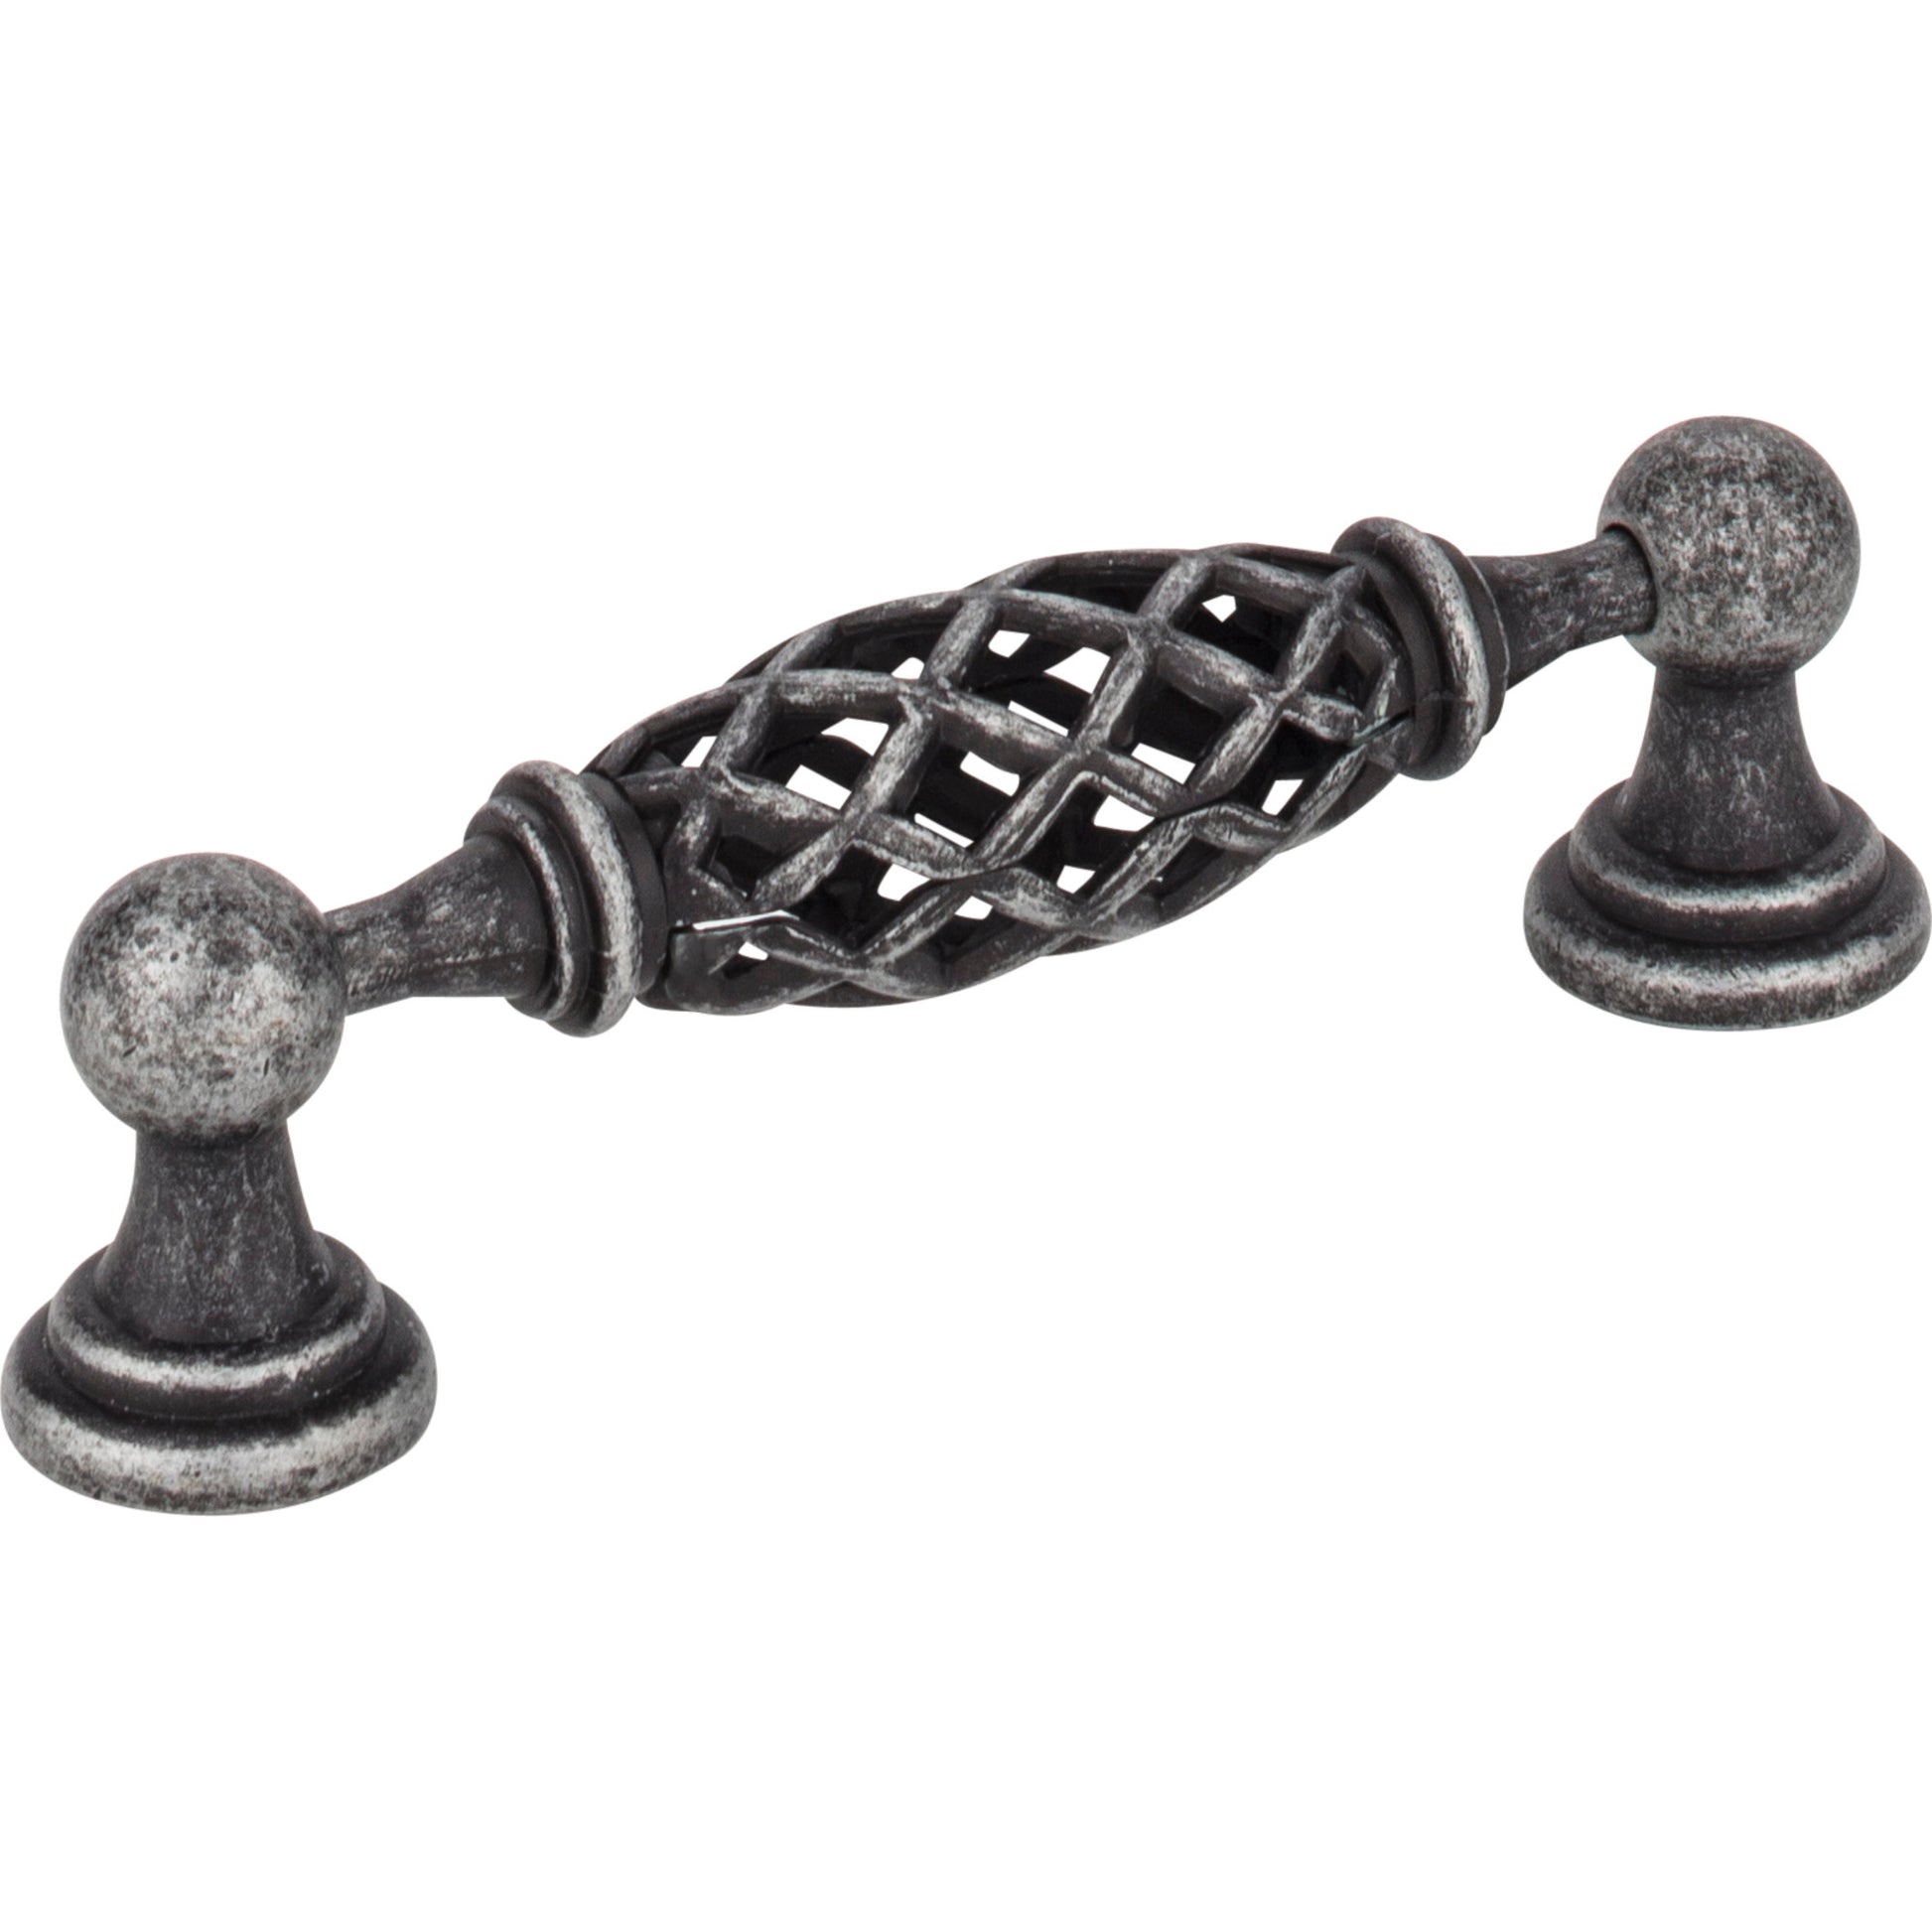 JEFFREY ALEXANDER 749-96B-SIM 96 mm Center-to-Center Distressed Antique Silver Birdcage Tuscany Cabinet Pull